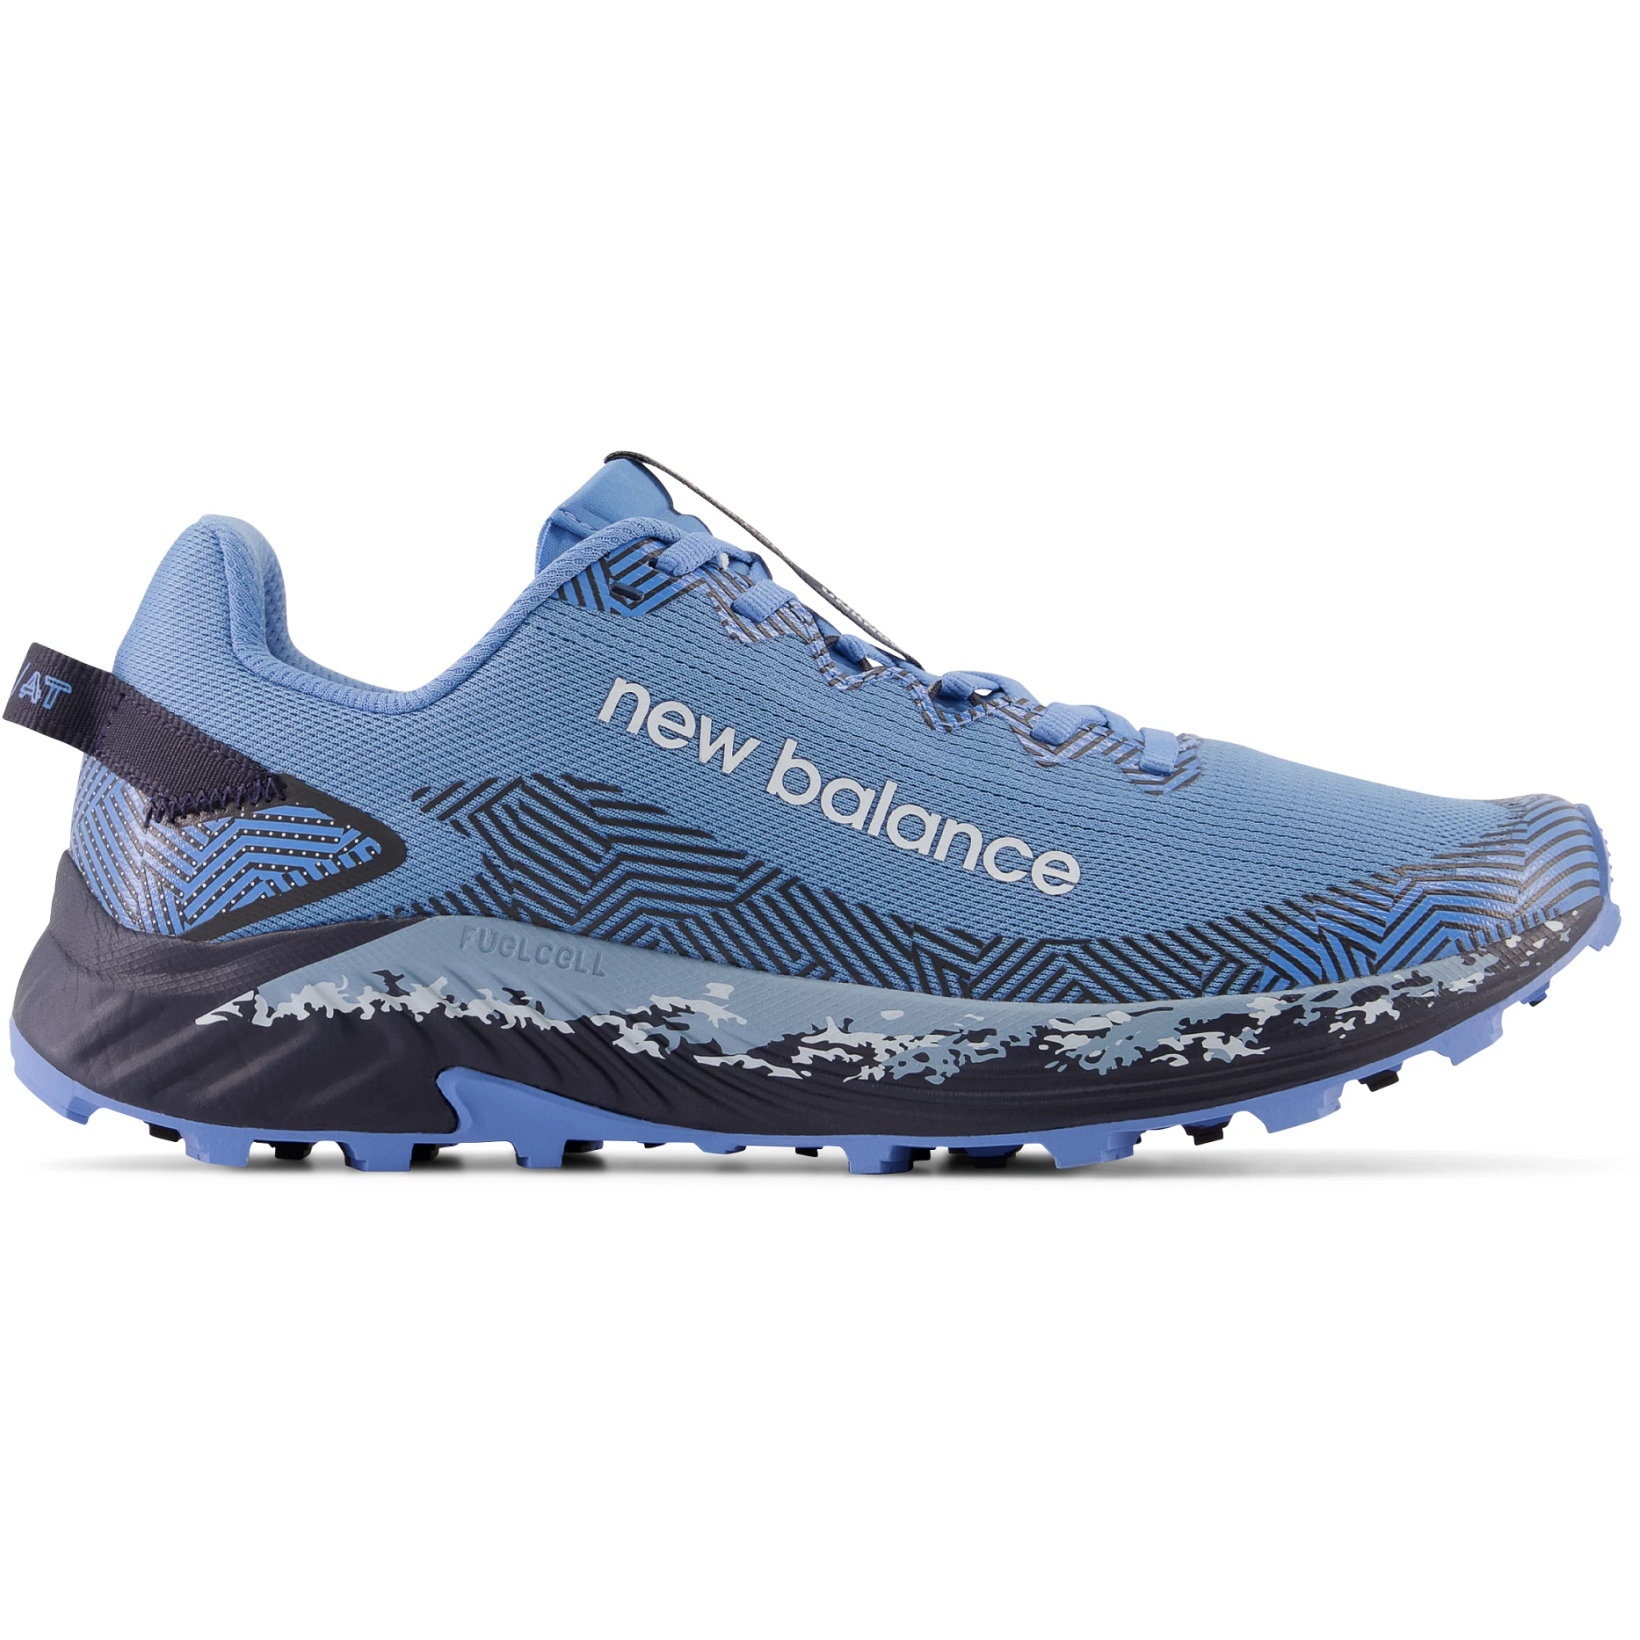 Productfoto van New Balance FuelCell Summit Unknown v4 Trailrunningschoenen - Blue/Eclipse